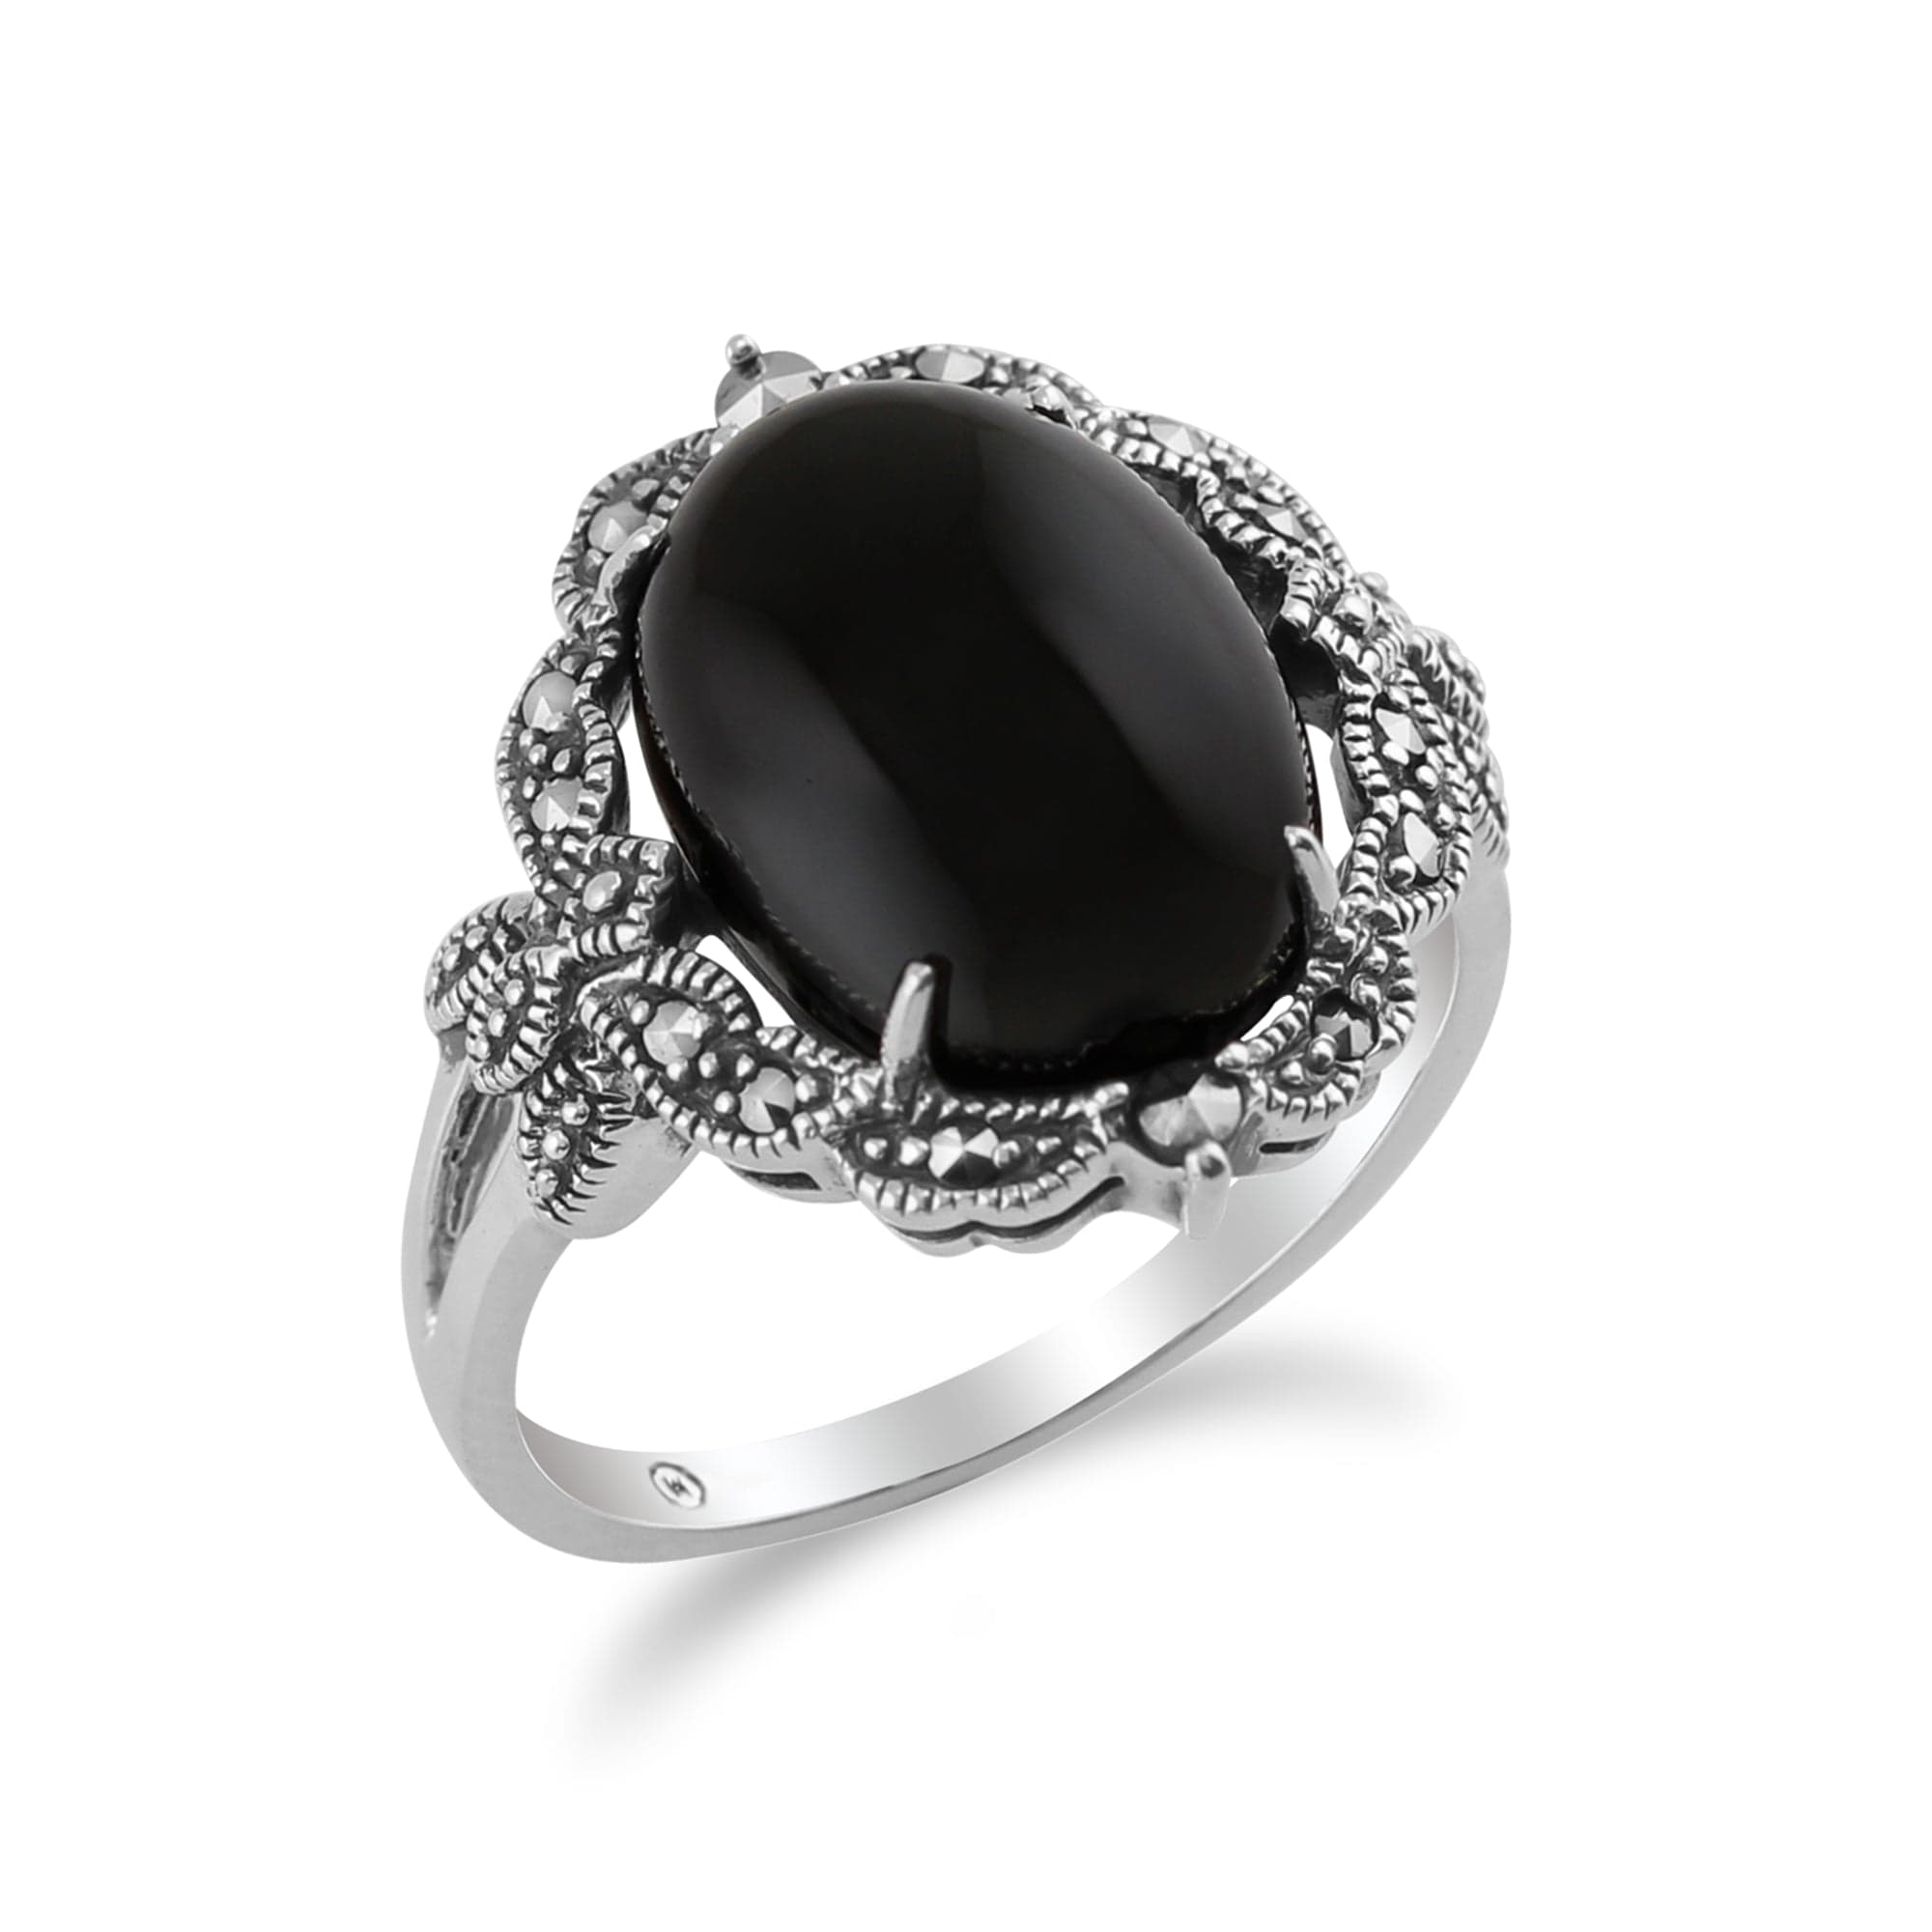 214R479201925 Art Nouveau Style Oval Black Onyx Cabochon & Marcasite Statement Ring in 925 Sterling Silver 2